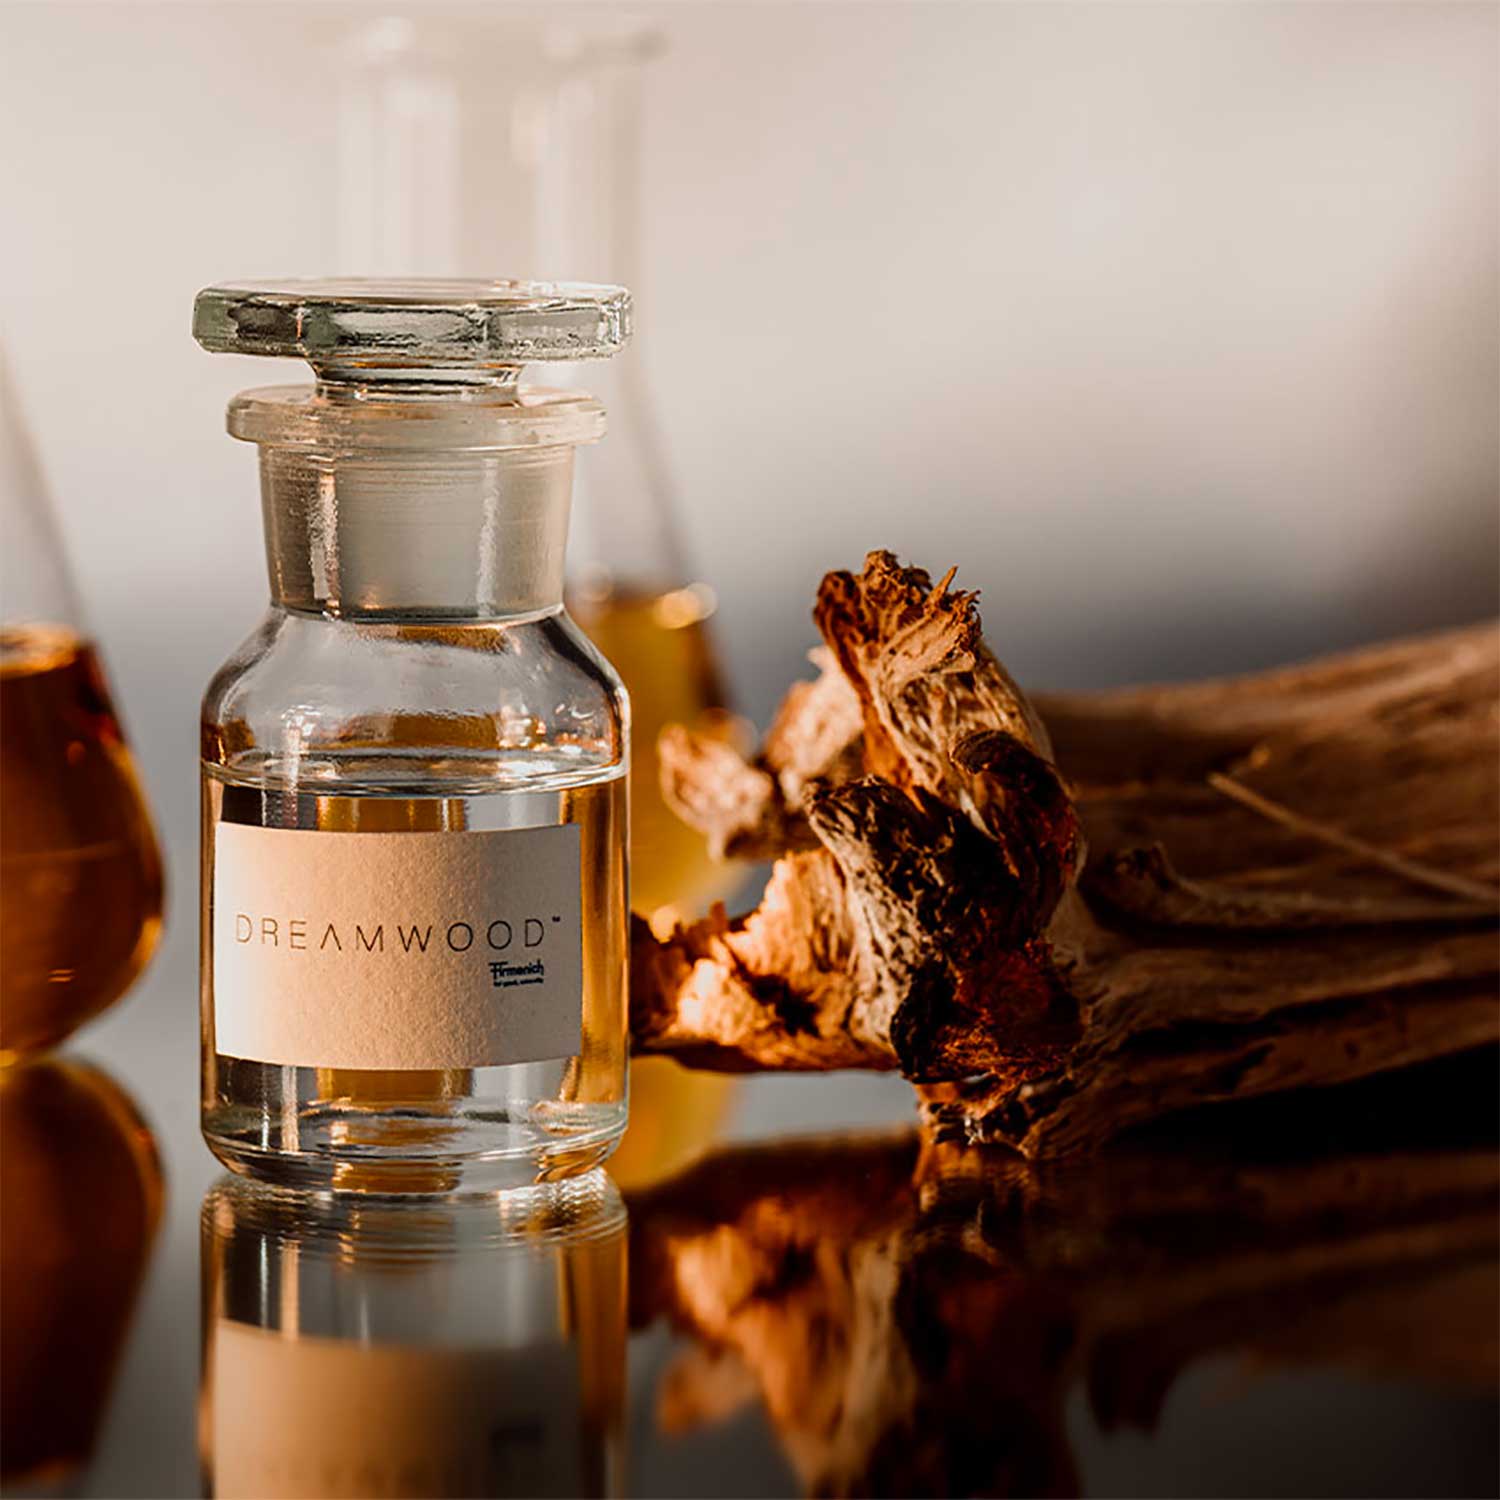 Dreamwood – the woody scent that dreams are made of